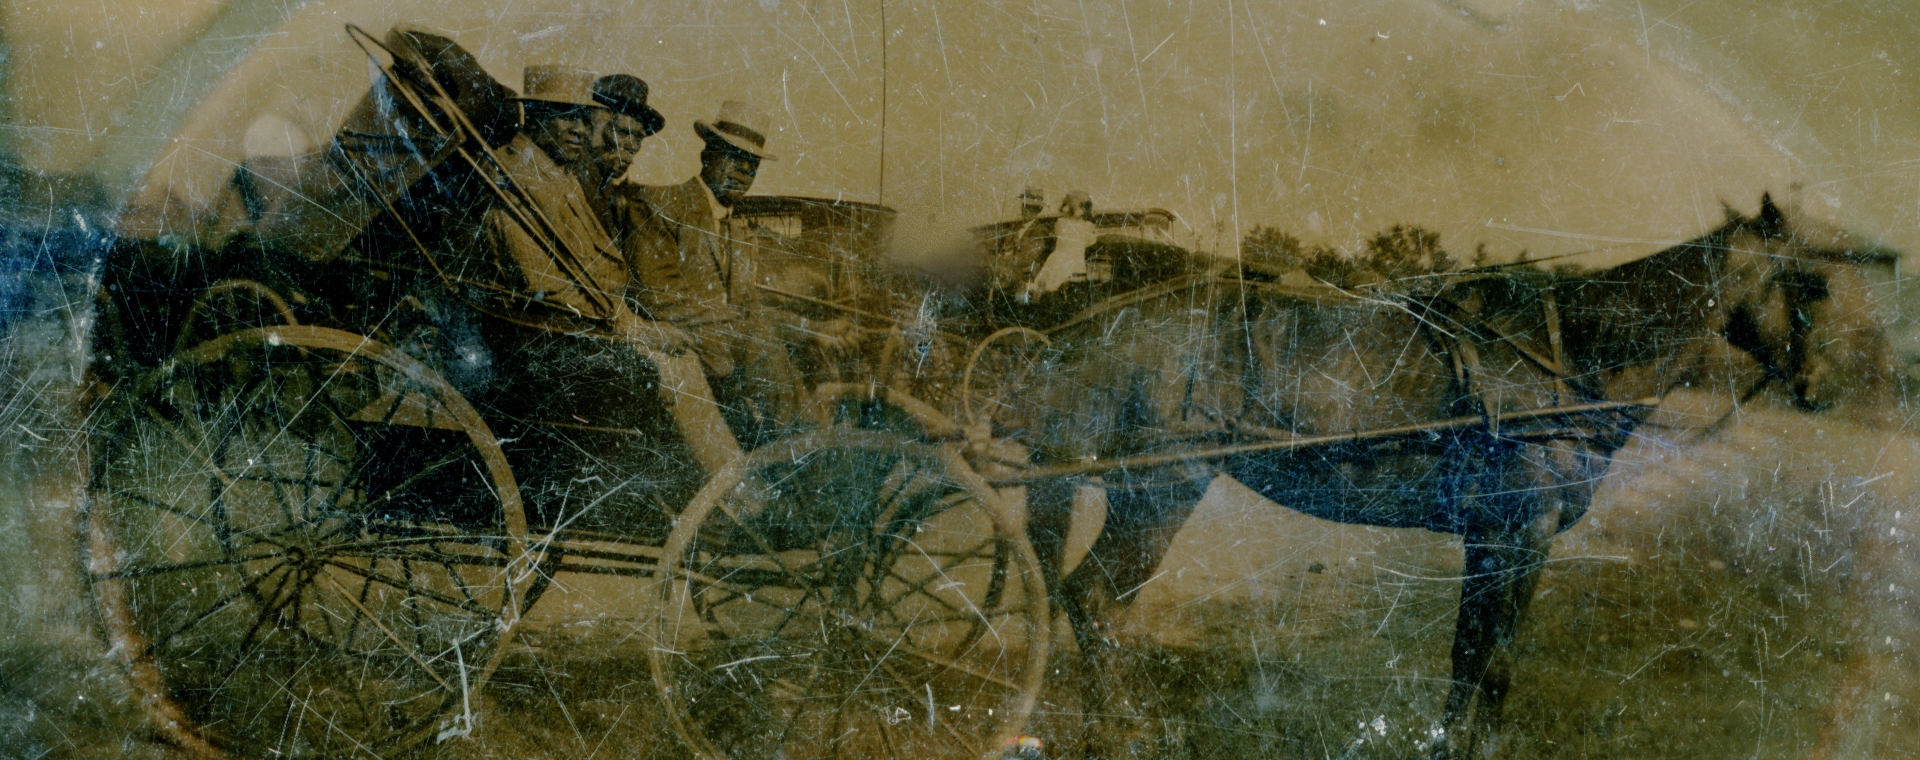 Tin photo circa 1900 depicting Solomon Kendall 2nd alongside one Black man and white man in a horse drawn carriage